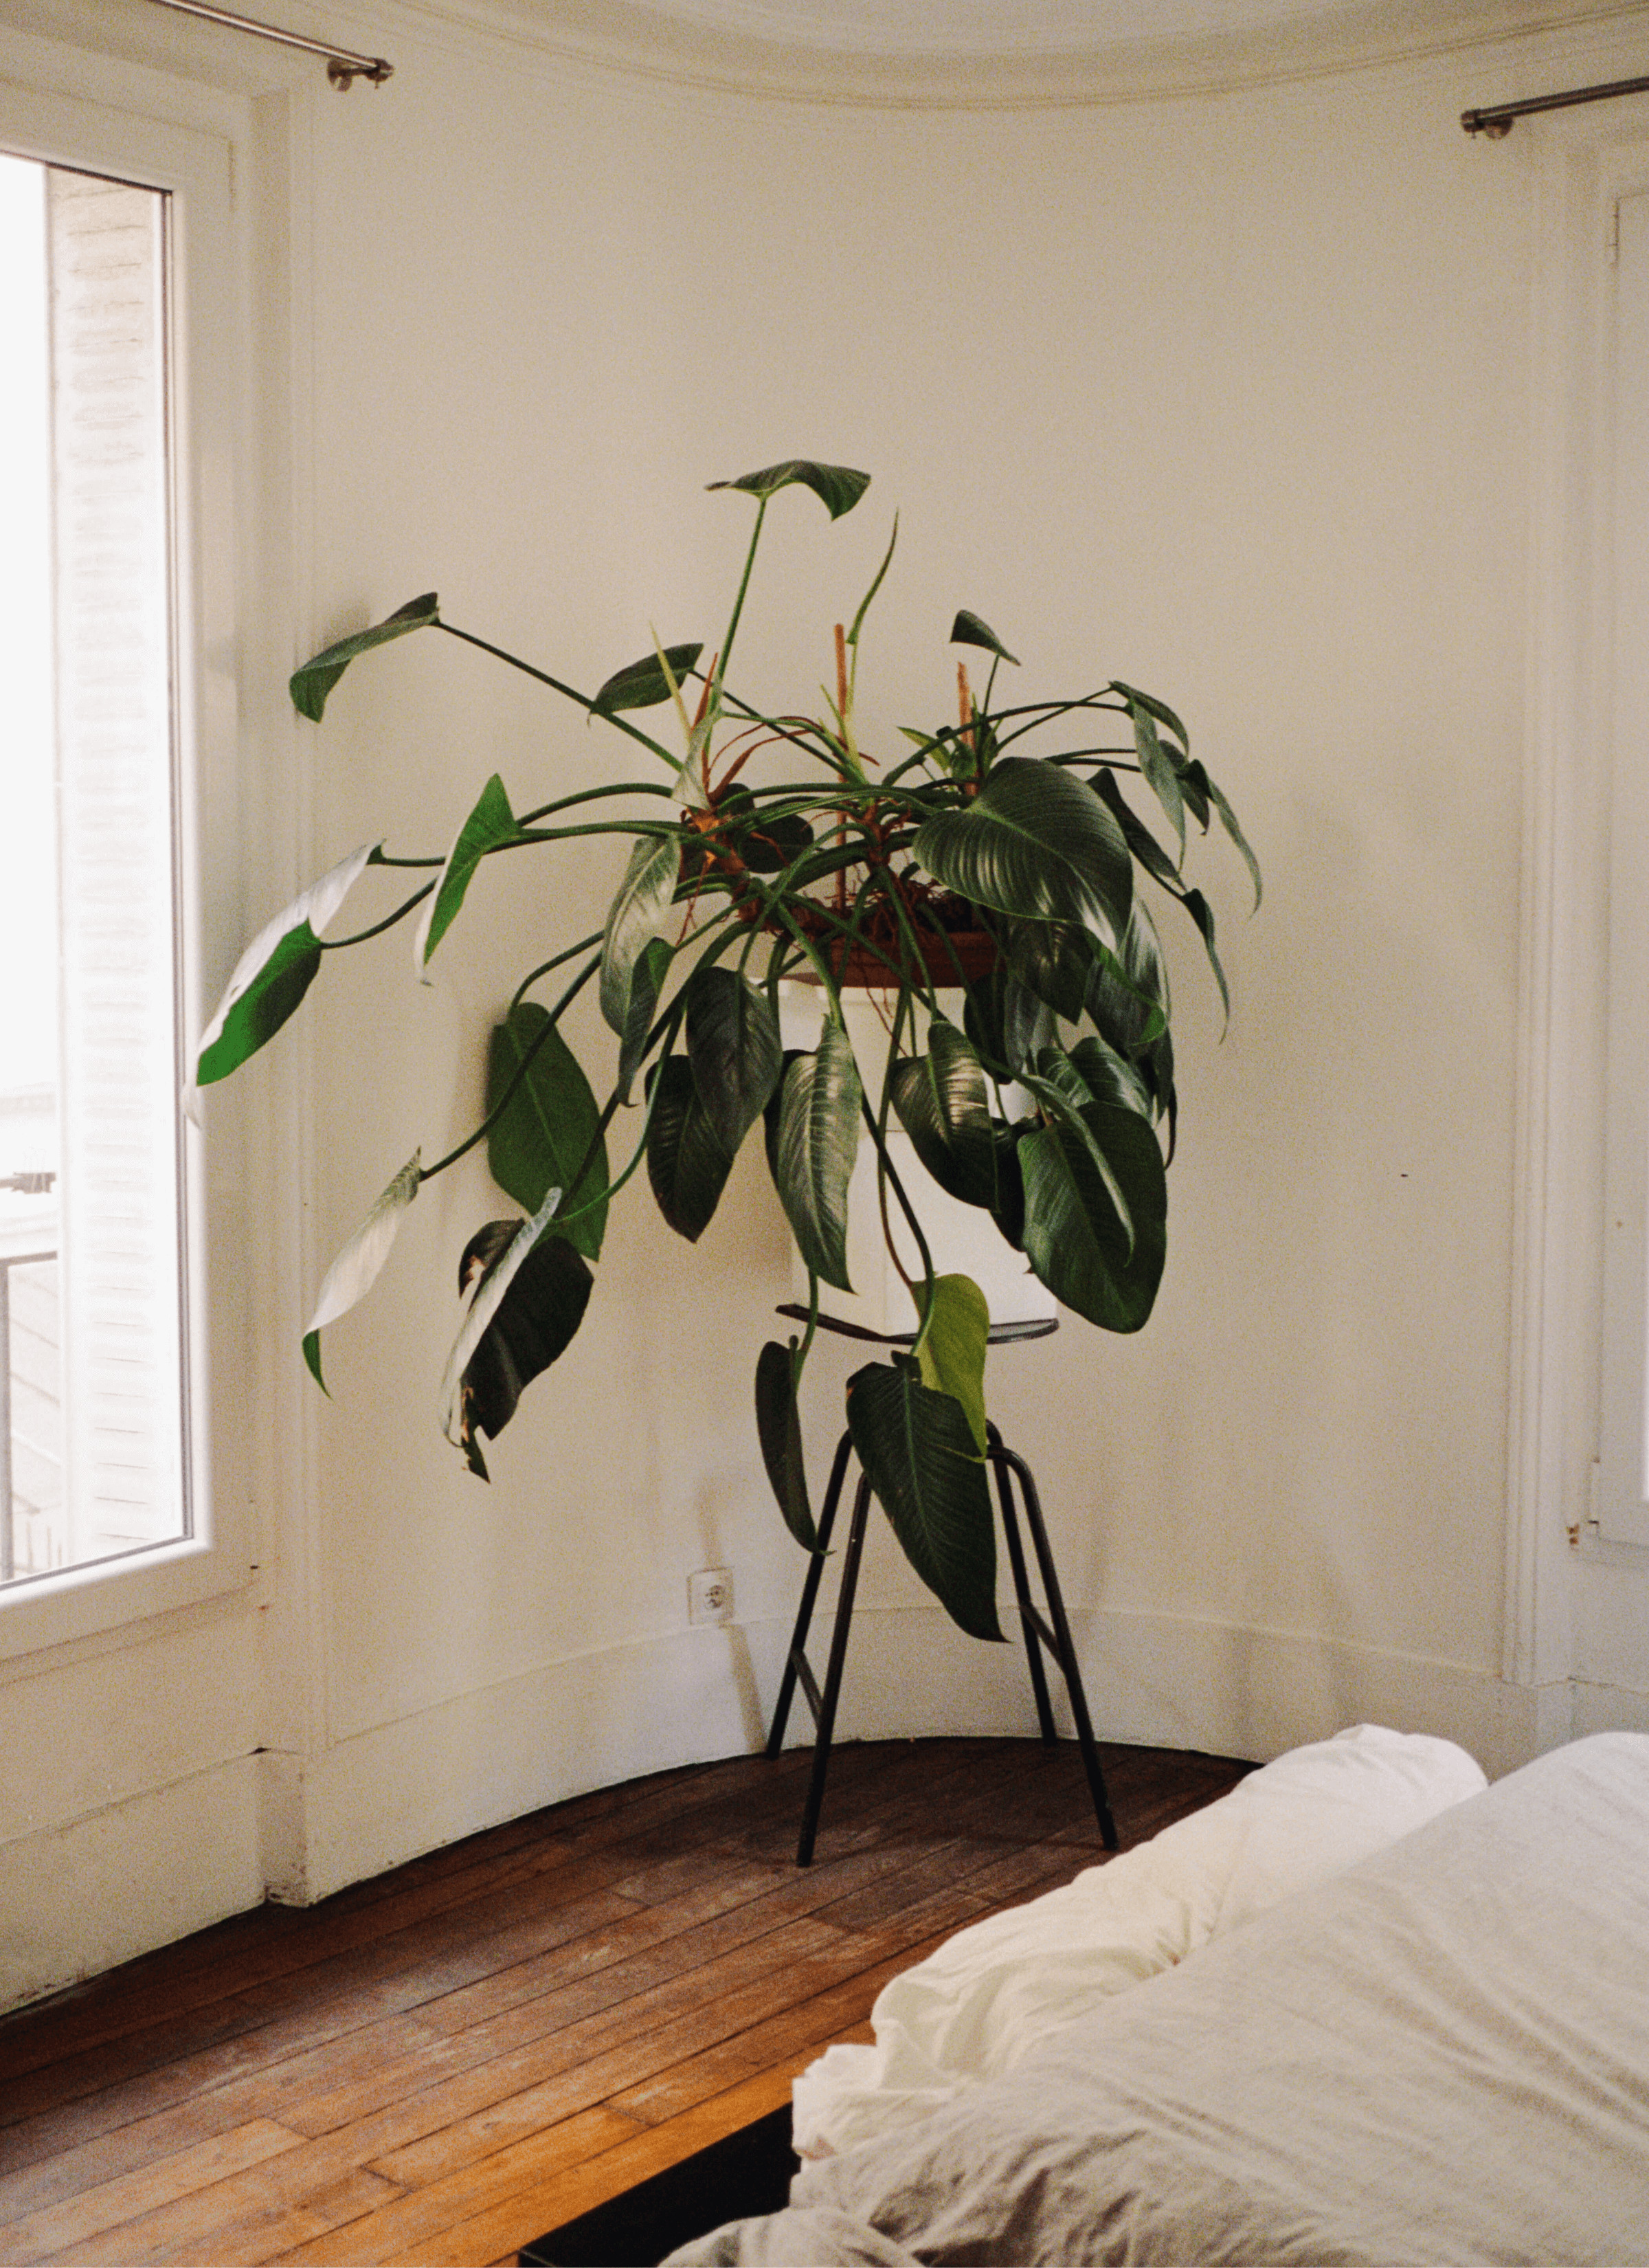 A potted Philodendron erubescens sits on a chair in the corner of the room while there are windows and a bed on the wooden floor.